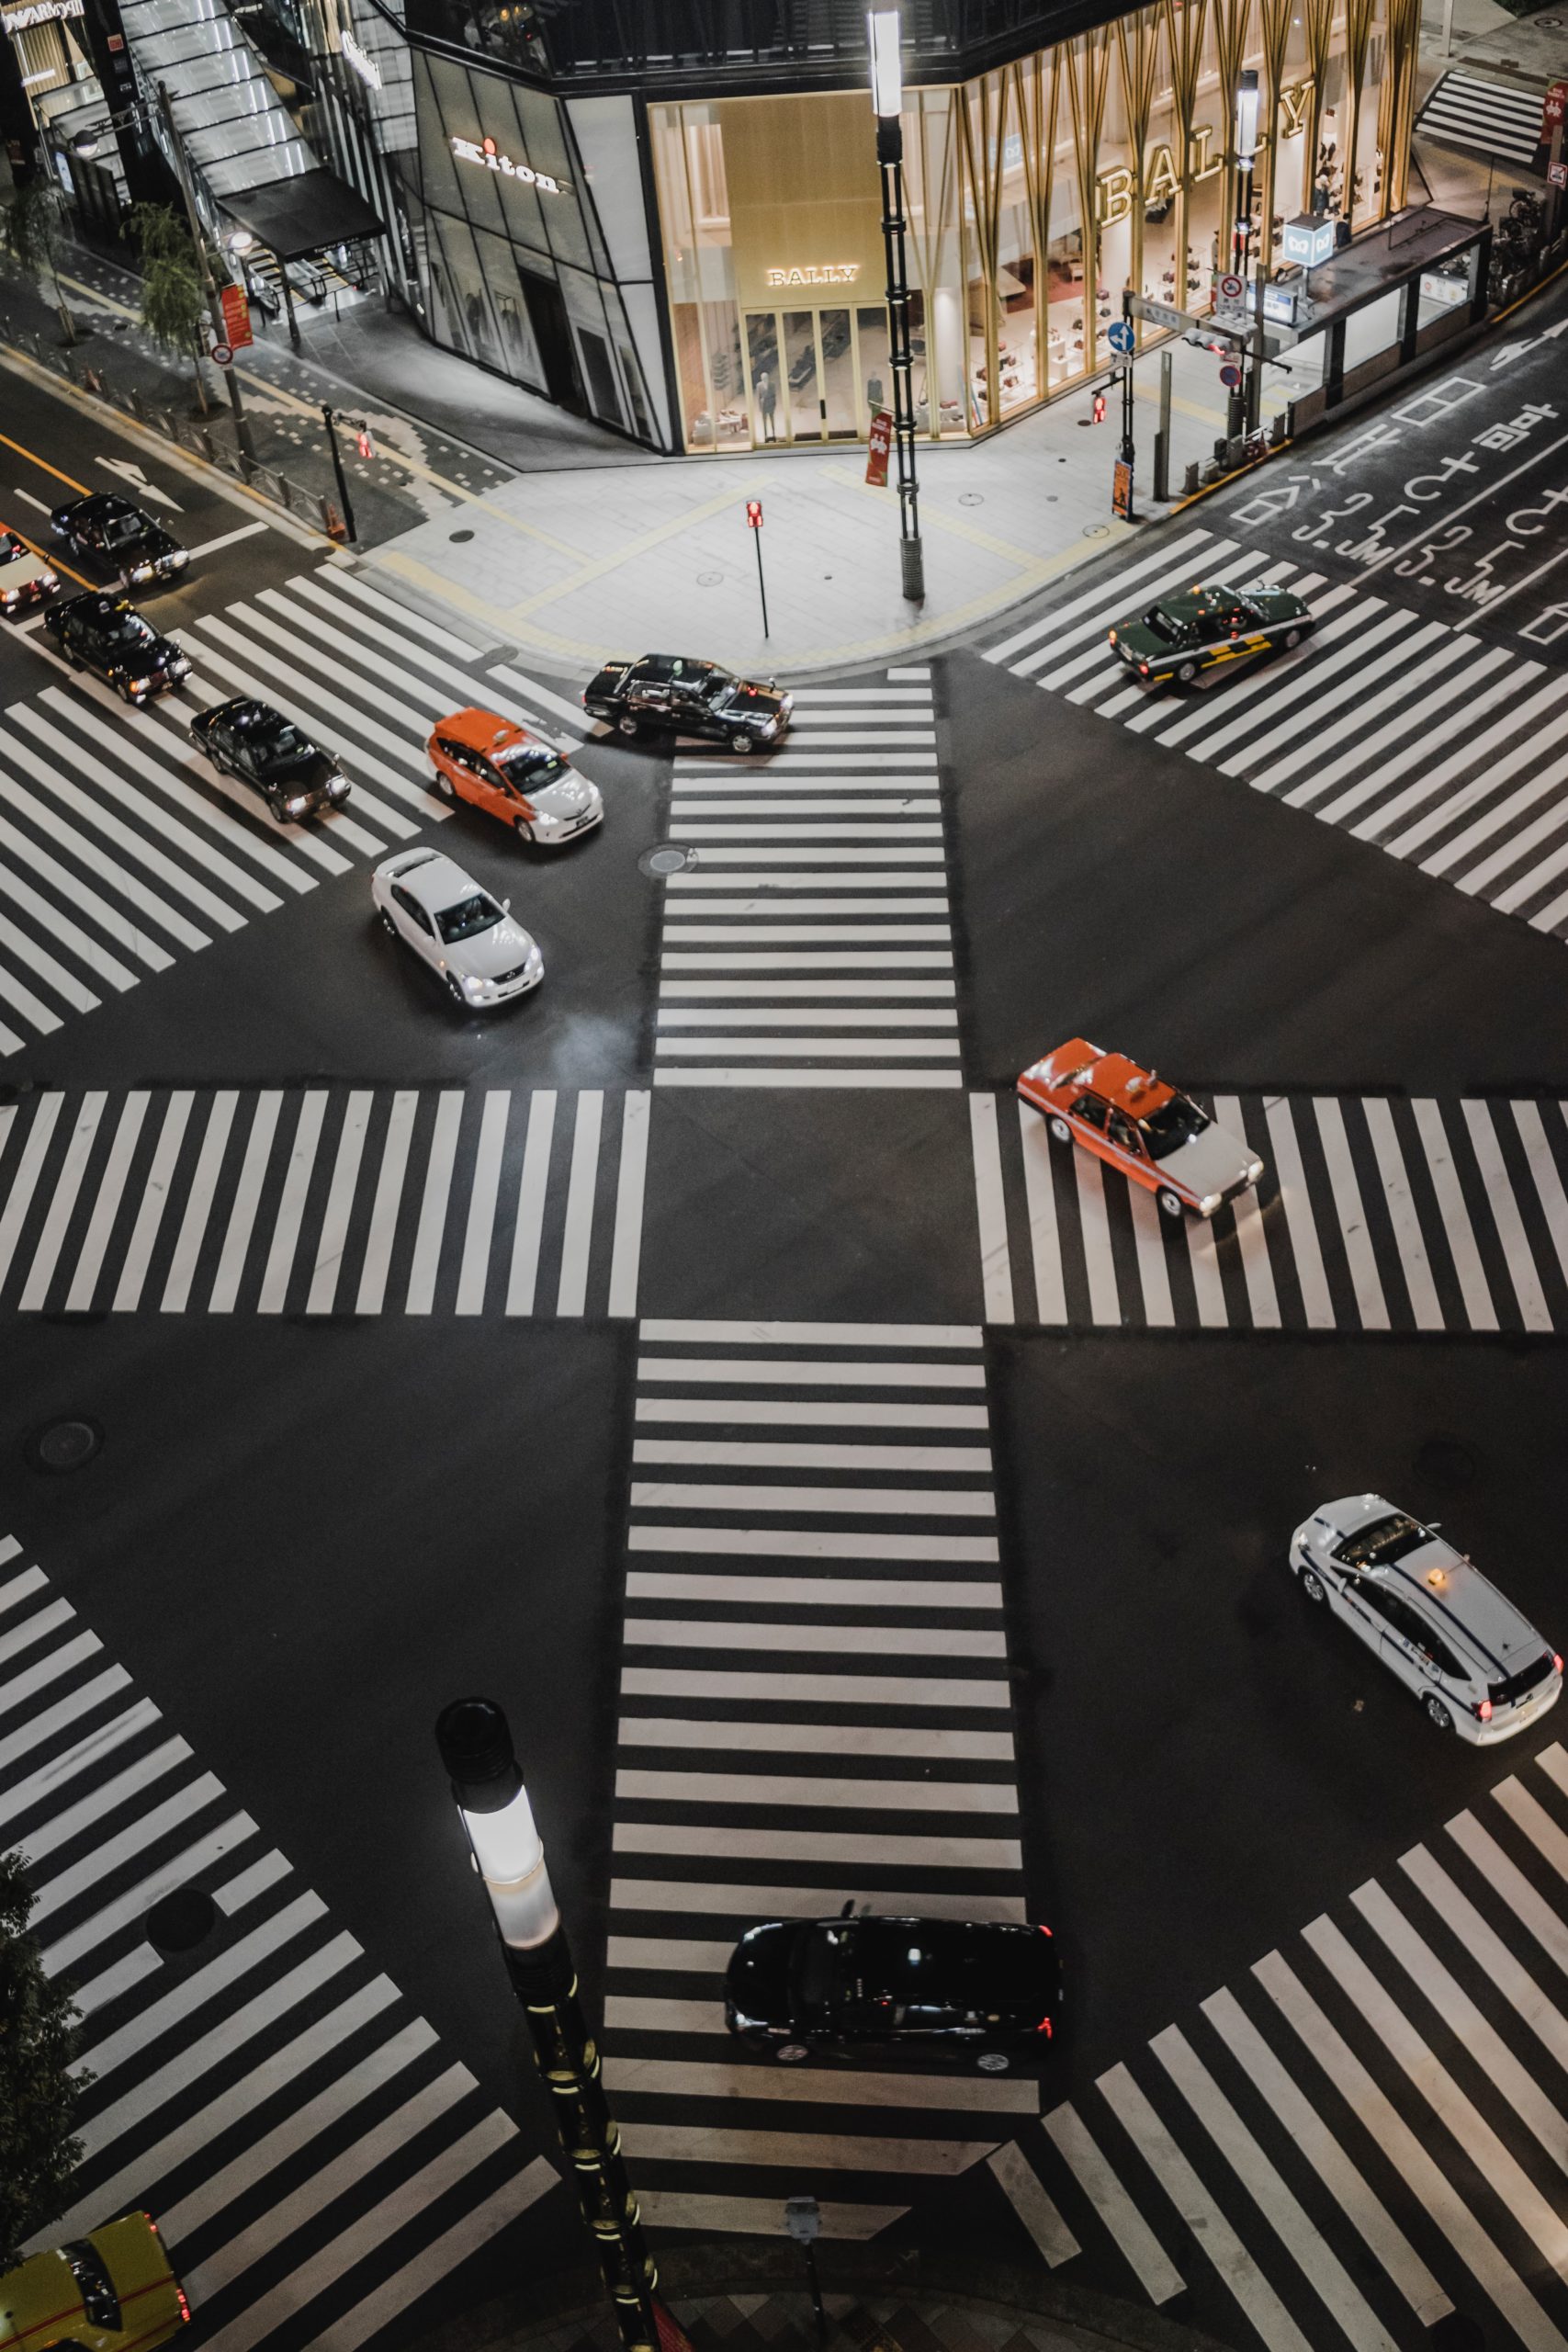 Tokoyo street crossing with cars